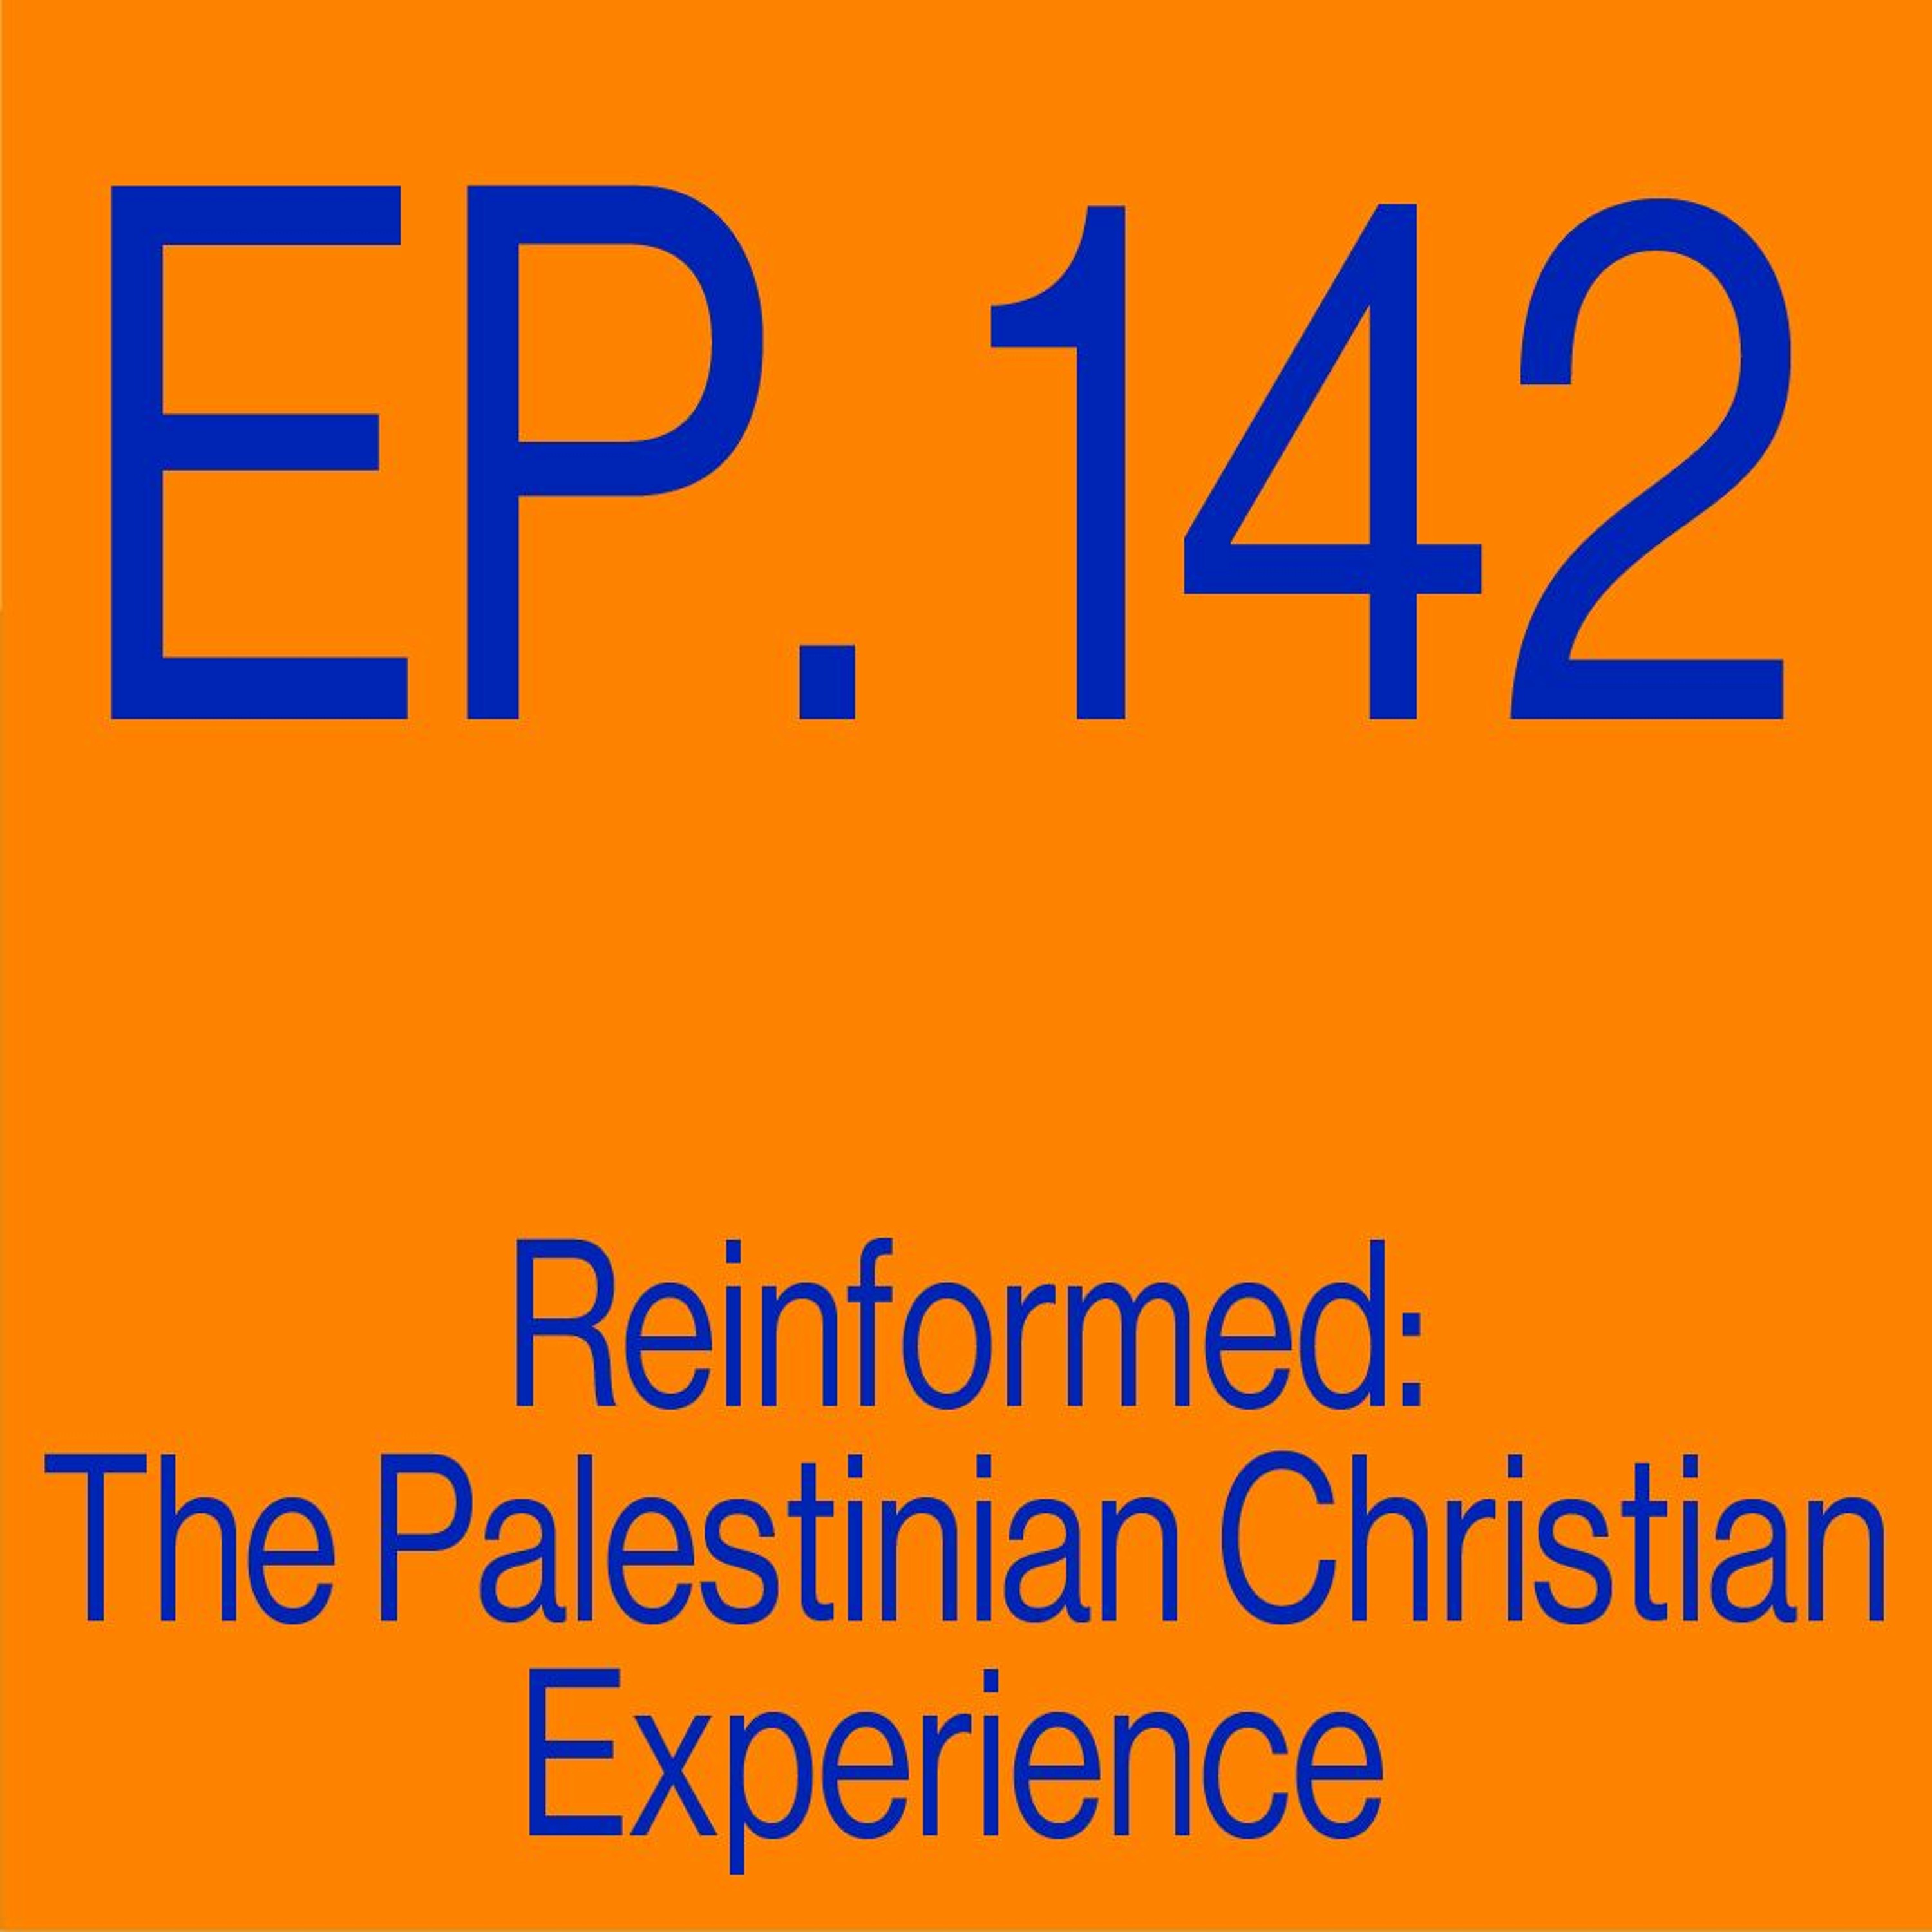 Episode 142: ReInformed - The Palestinian Christian Experience